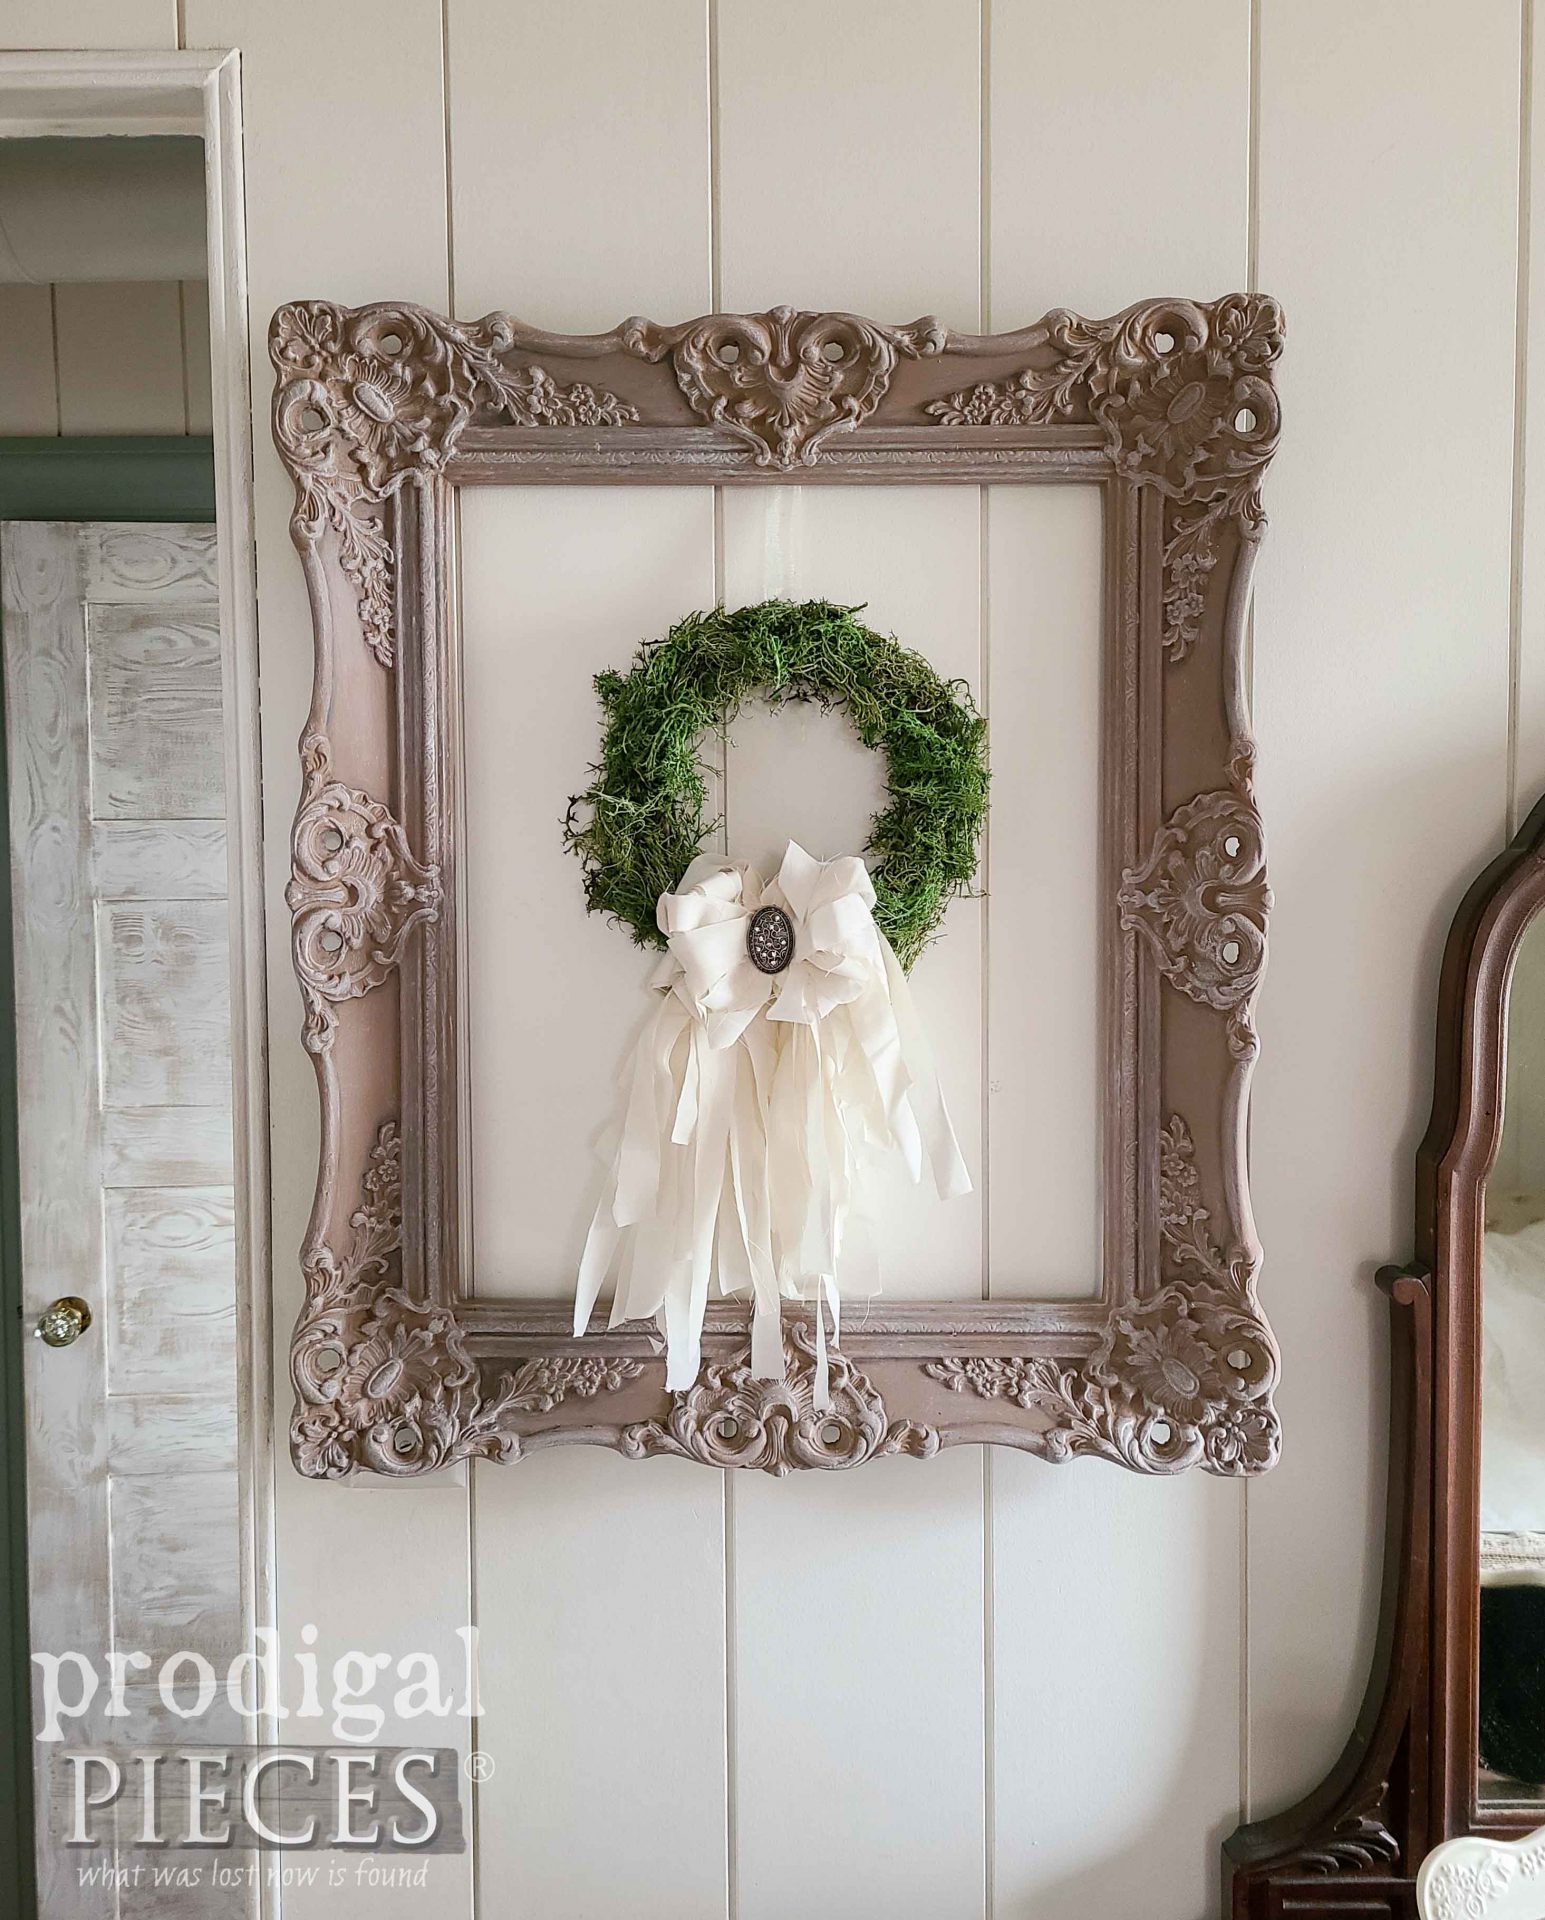 Vintage Upcycled Ornate Frame Makeover for Farmhouse Decor by Larissa of Prodigal Pieces | prodigalpieces.com #prodigalpieces #farmhouse #diy #homedecor